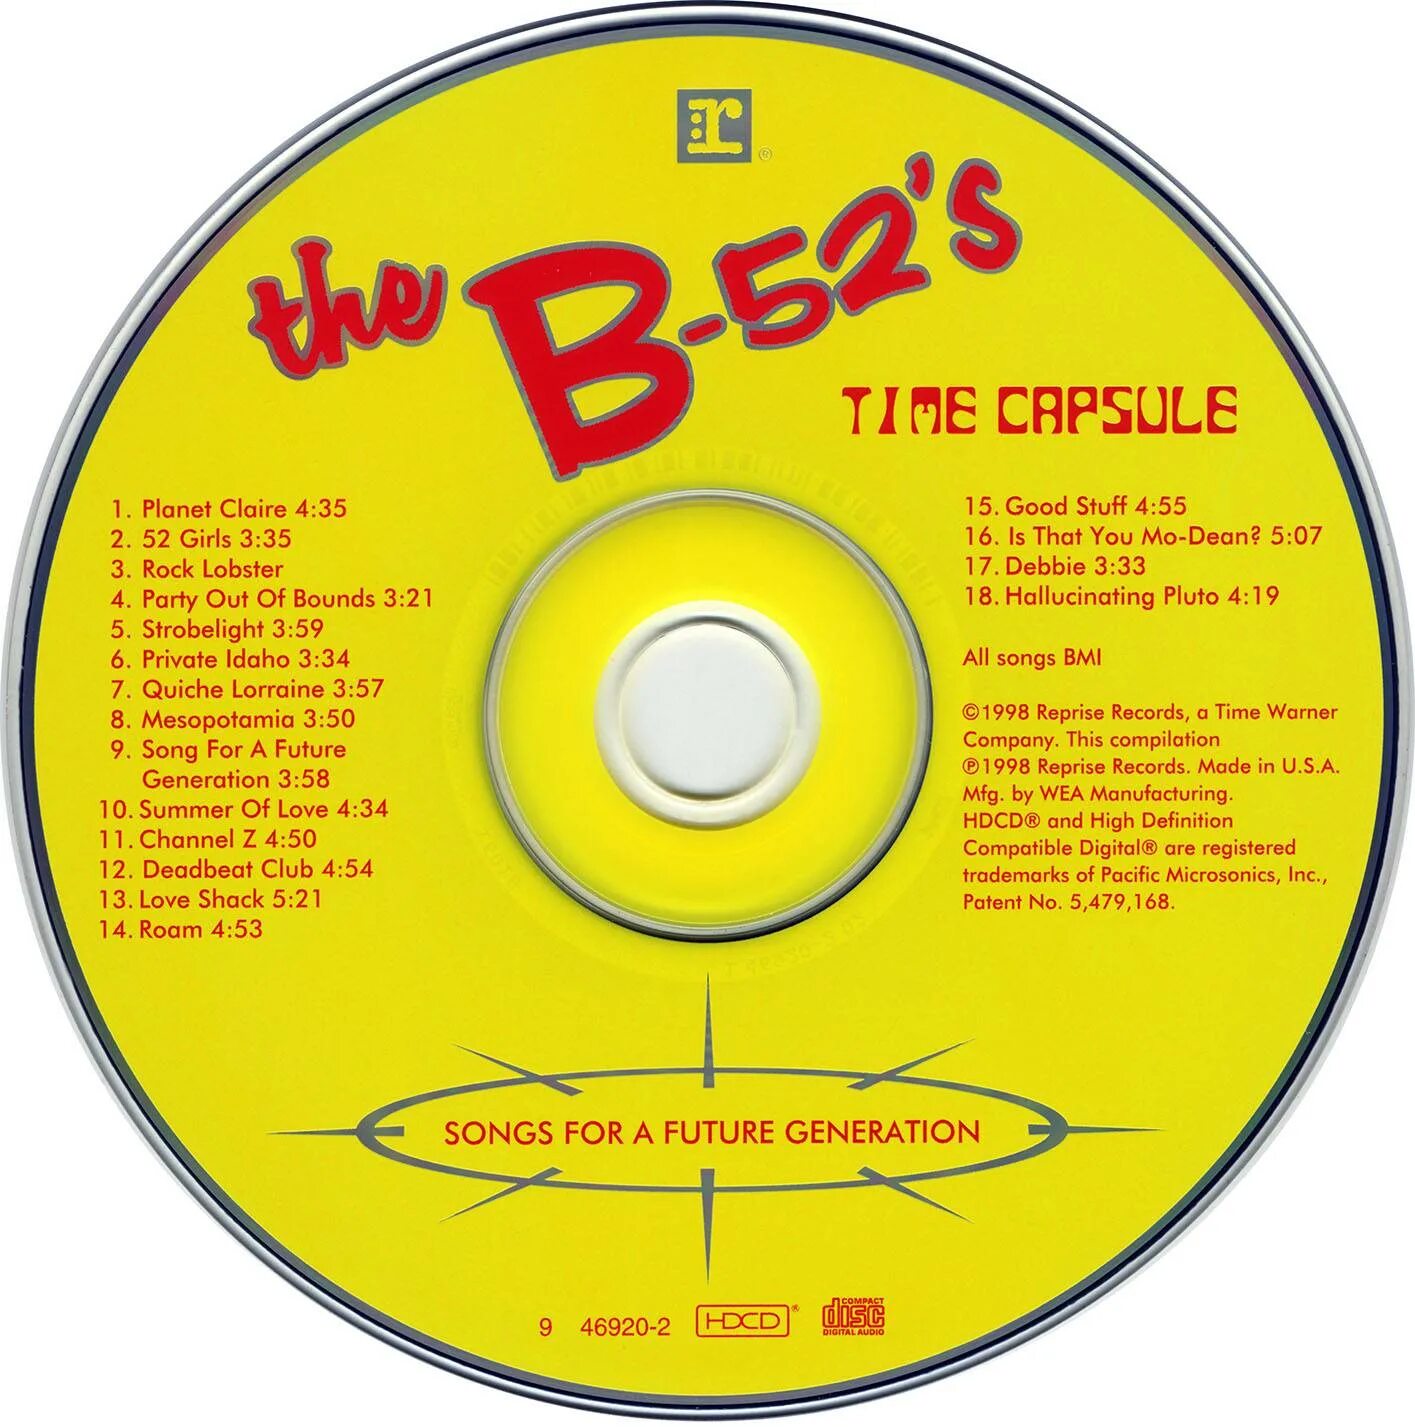 The b 52's Planet Claire. Good stuff the b-52s. Фото группы the b-52's - time Capsule. The b-52s albums.